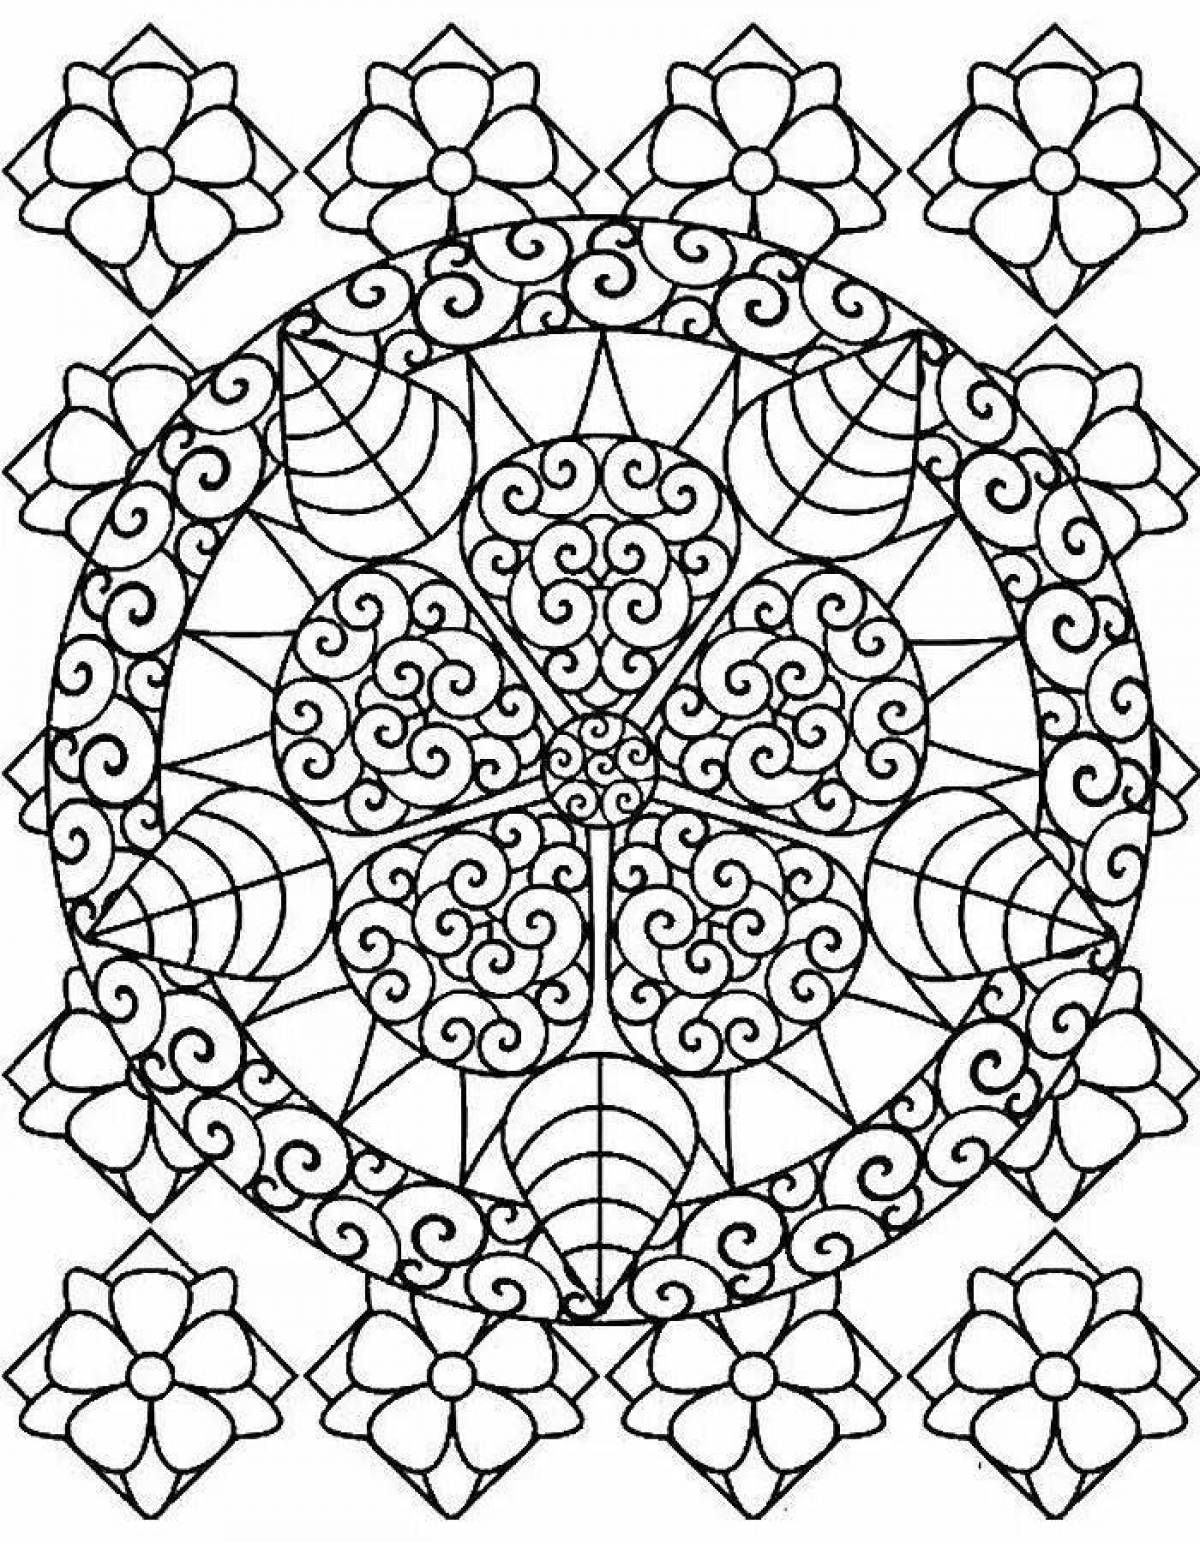 Adorable patterns and ornaments for coloring pages